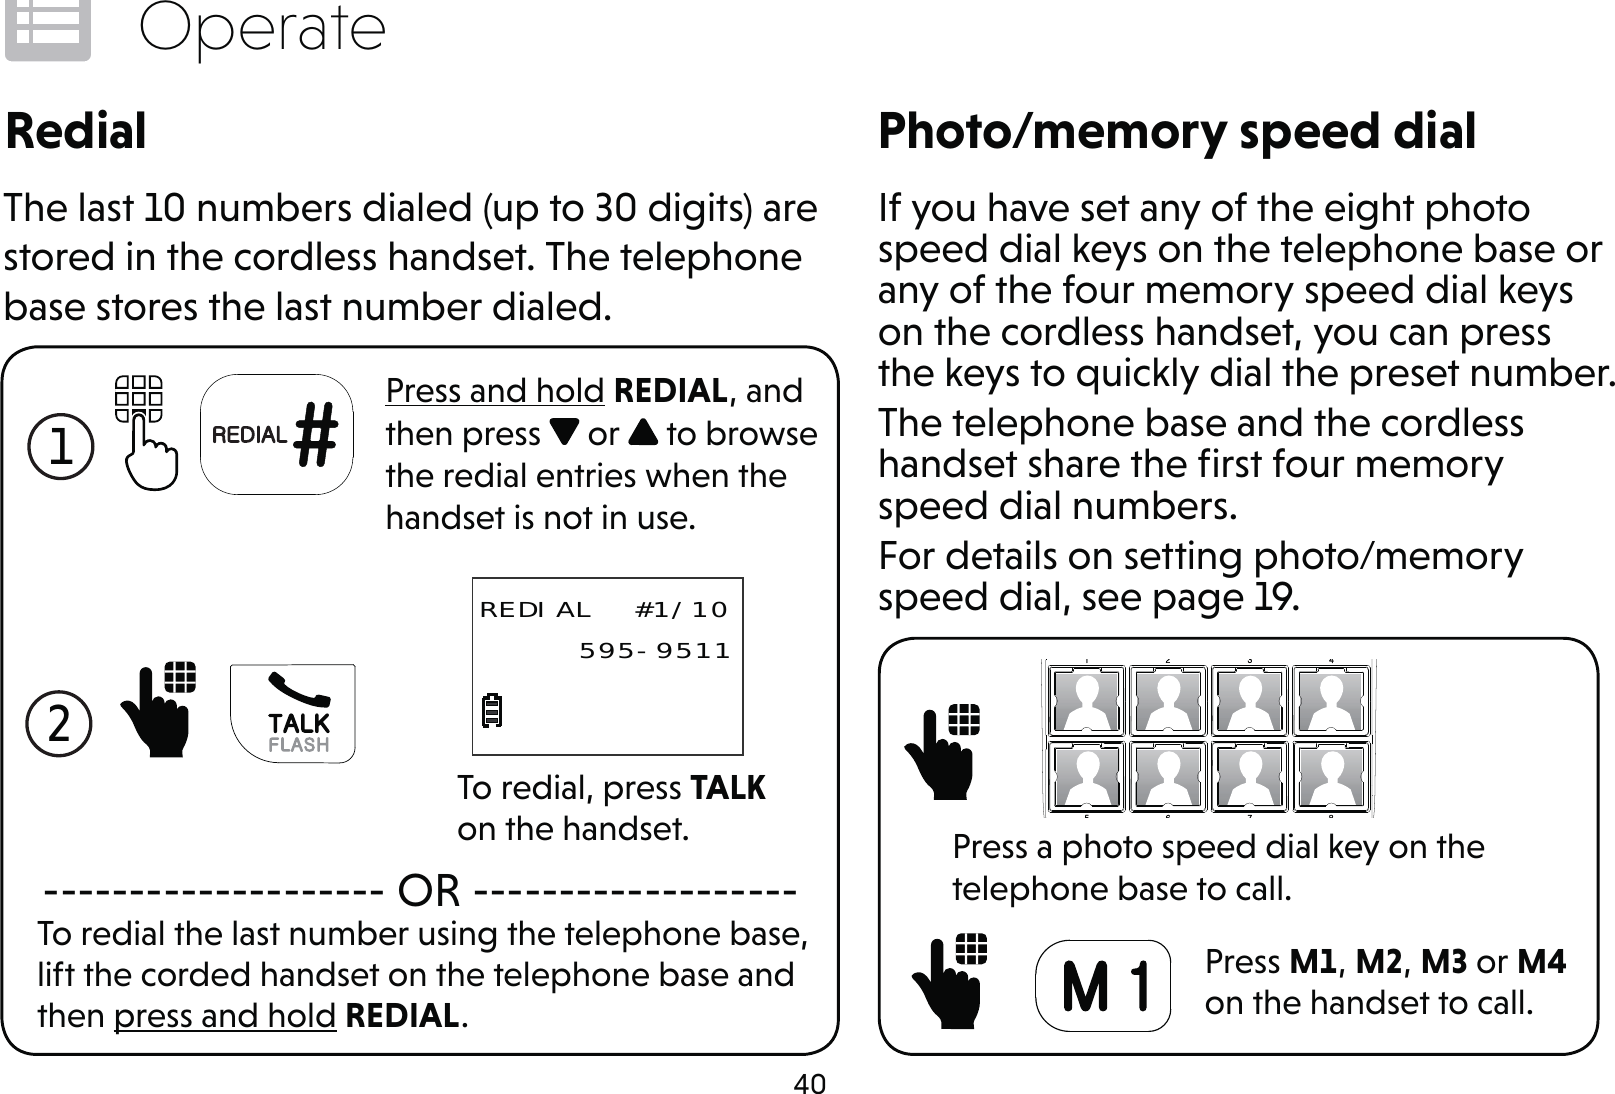 40OperatePhoto/memory speed dialIf you have set any of the eight photo speed dial keys on the telephone base or any of the four memory speed dial keys on the cordless handset, you can press the keys to quickly dial the preset number.The telephone base and the cordless handset share the ﬁrst four memory speed dial numbers.For details on setting photo/memory speed dial, see page 19. Press a photo speed dial key on the telephone base to call. Press M1, M2, M3 or M4 on the handset to call.RedialThe last 10 numbers dialed (up to 30 digits) are stored in the cordless handset. The telephone base stores the last number dialed.1 Press and hold REDIAL, and then press   or   to browse the redial entries when the handset is not in use.To redial the last number using the telephone base, lift the corded handset on the telephone base and then press and hold REDIAL.-------------------- OR -------------------2 To redial, press TALK on the handset.REDIAL  #1/10     595-9511